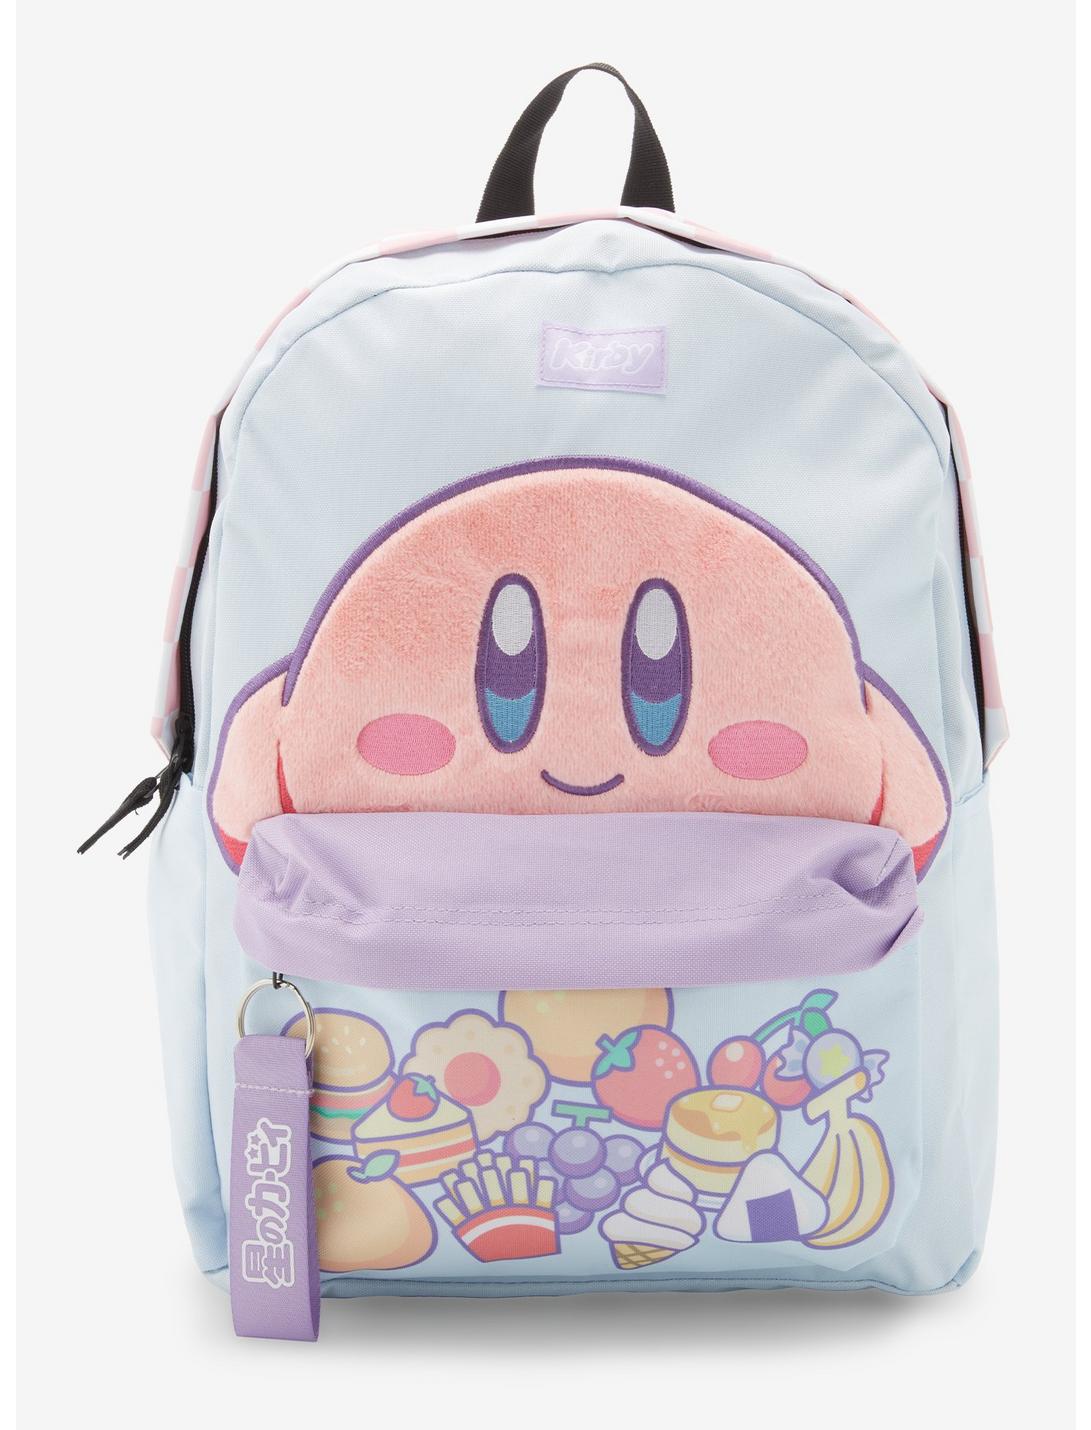 Kirby Snacks Fuzzy Pastel Backpack, , hi-res